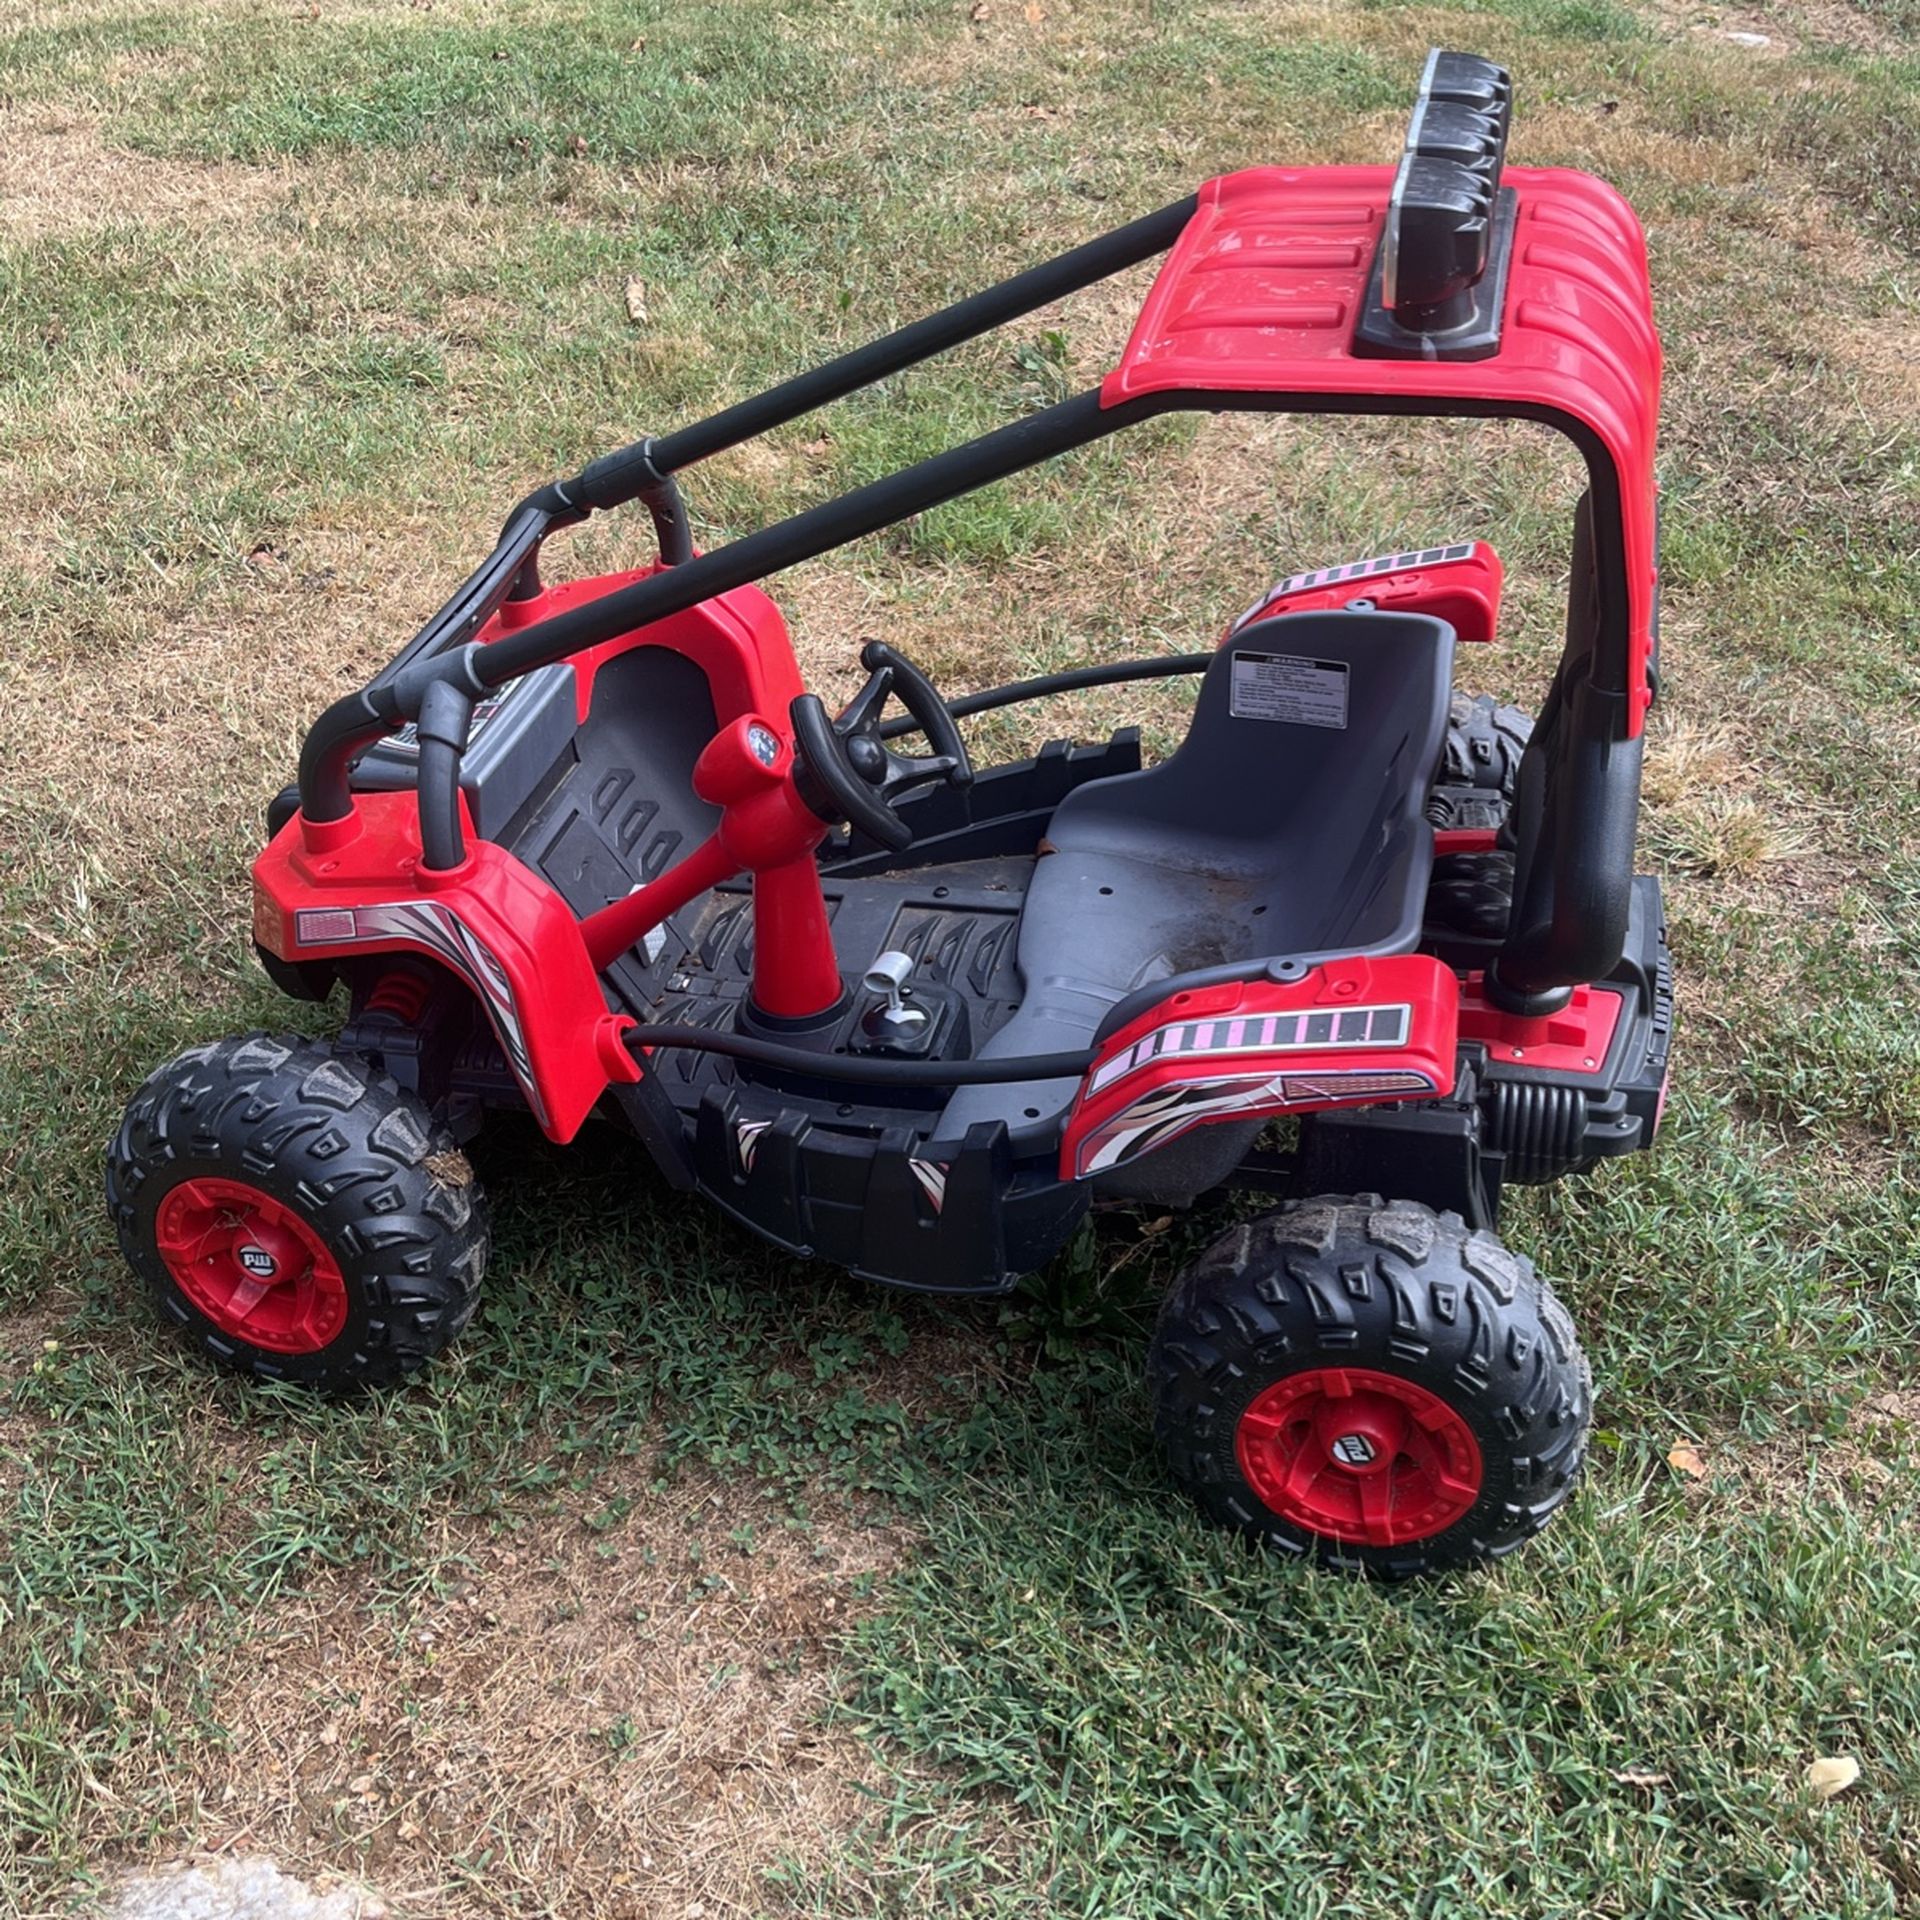 Power Wheels 12V Baia Trailster Powered Ride-On - Red/Black